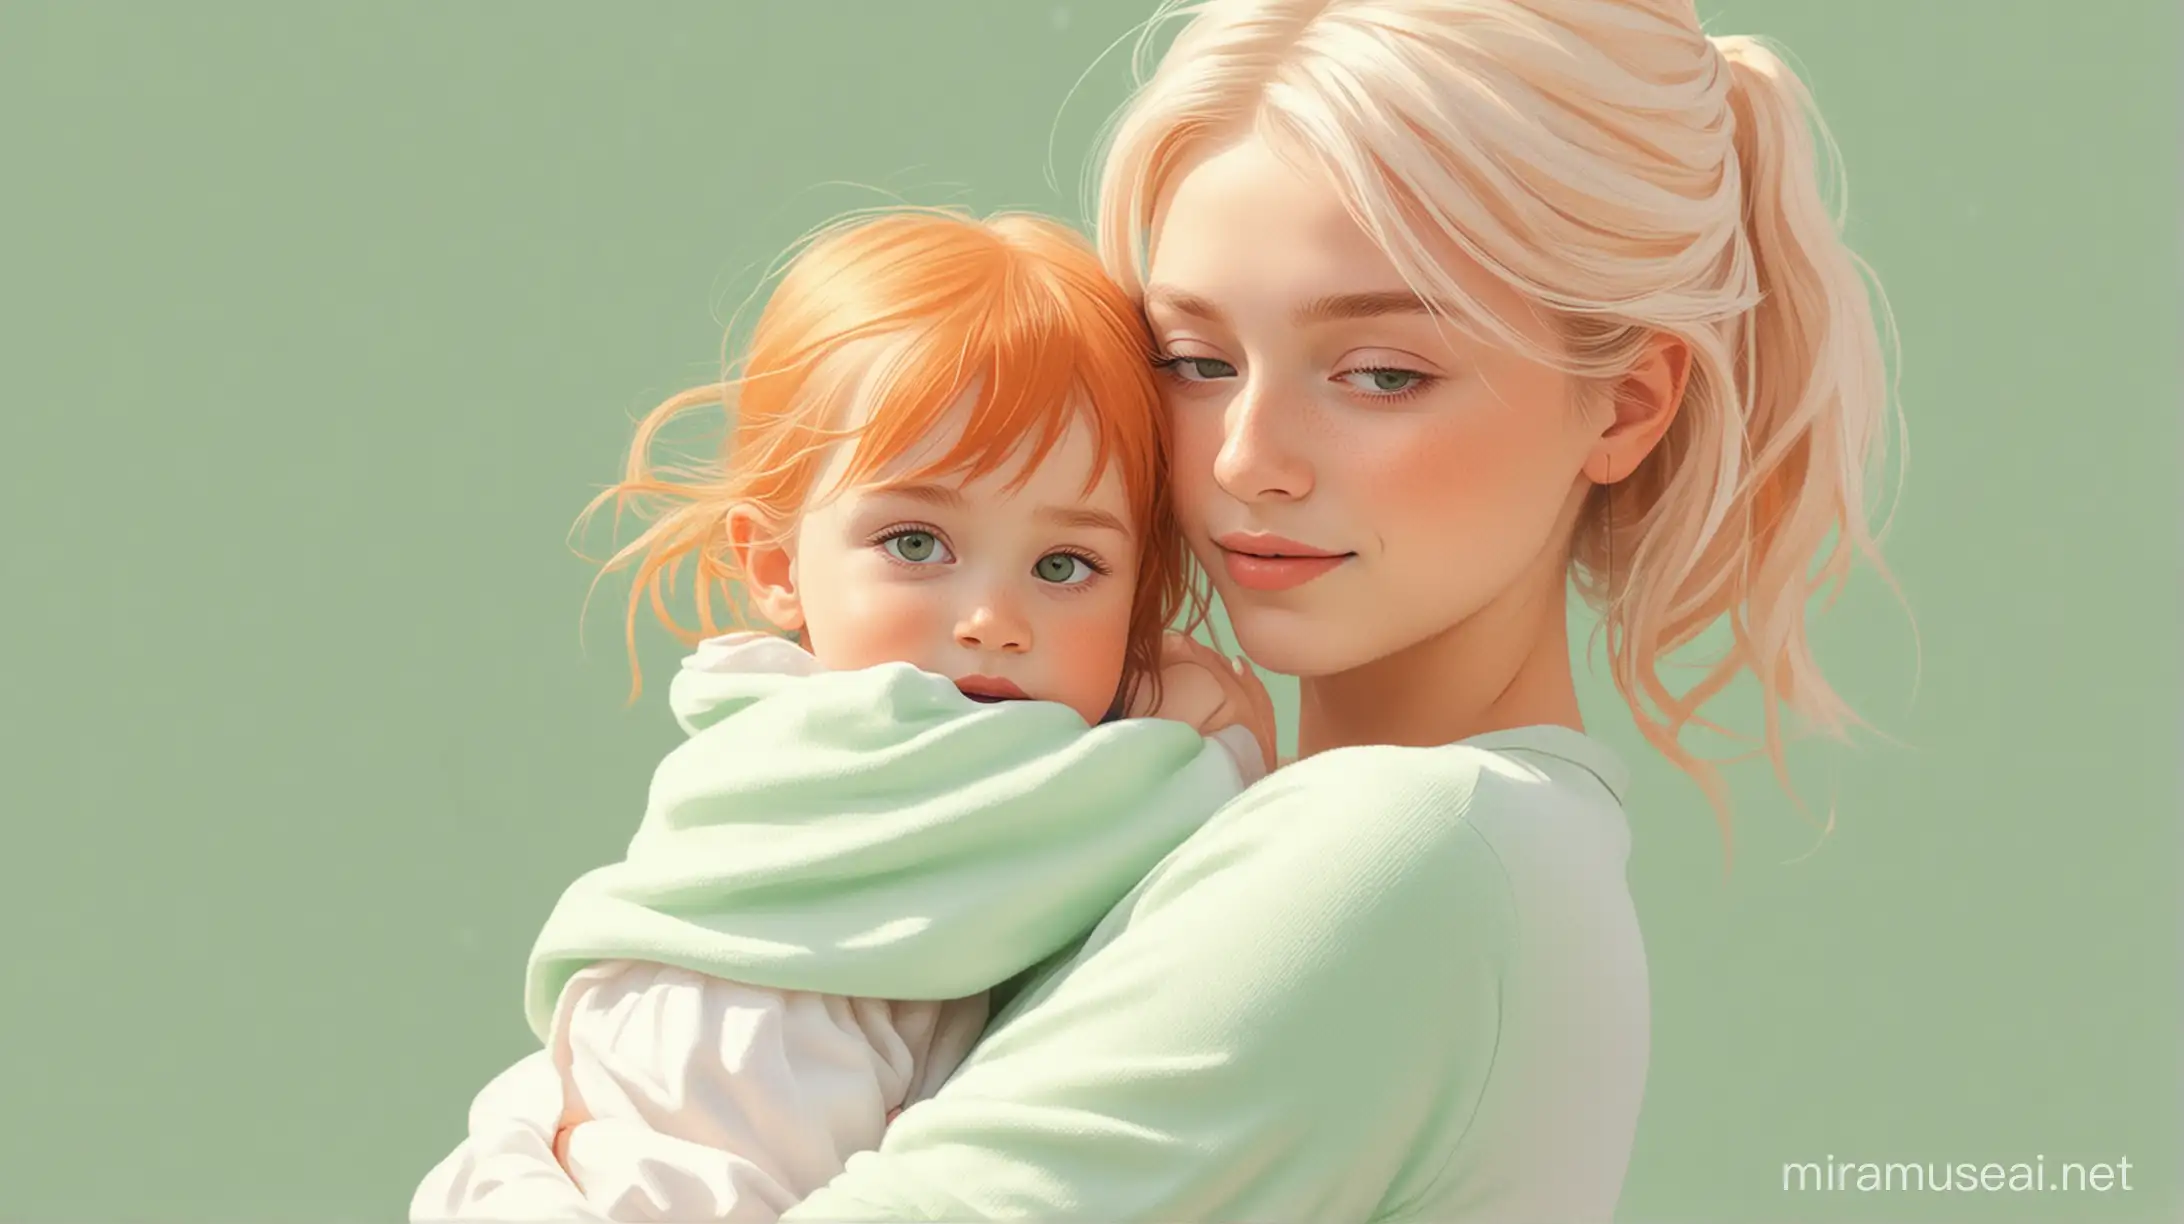 Mother Holding Child in Animated Pastel Scene